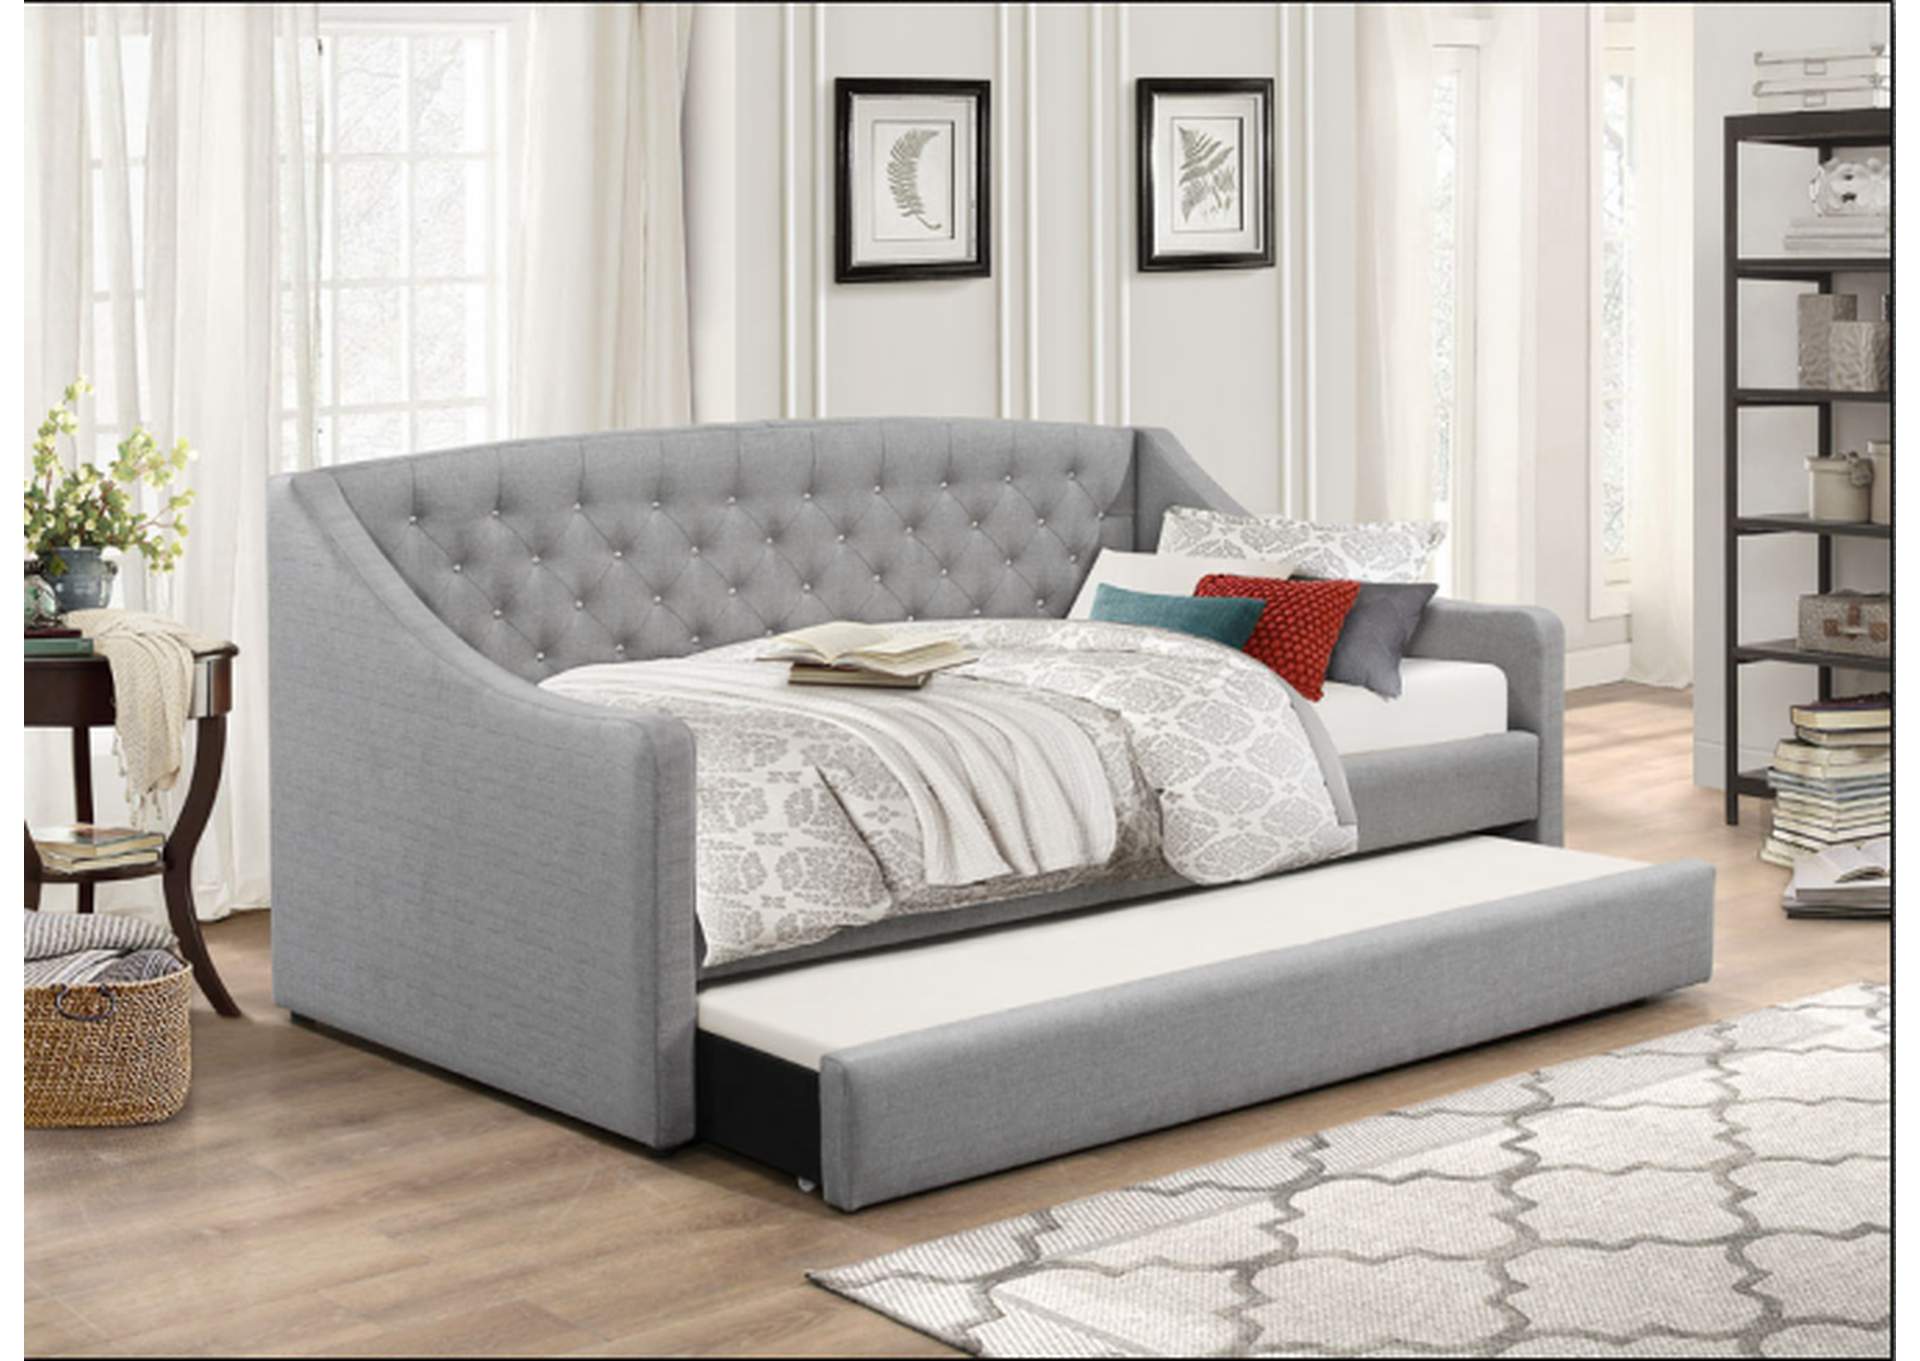 4470 Grey Daybed With Trundle,Global Trading